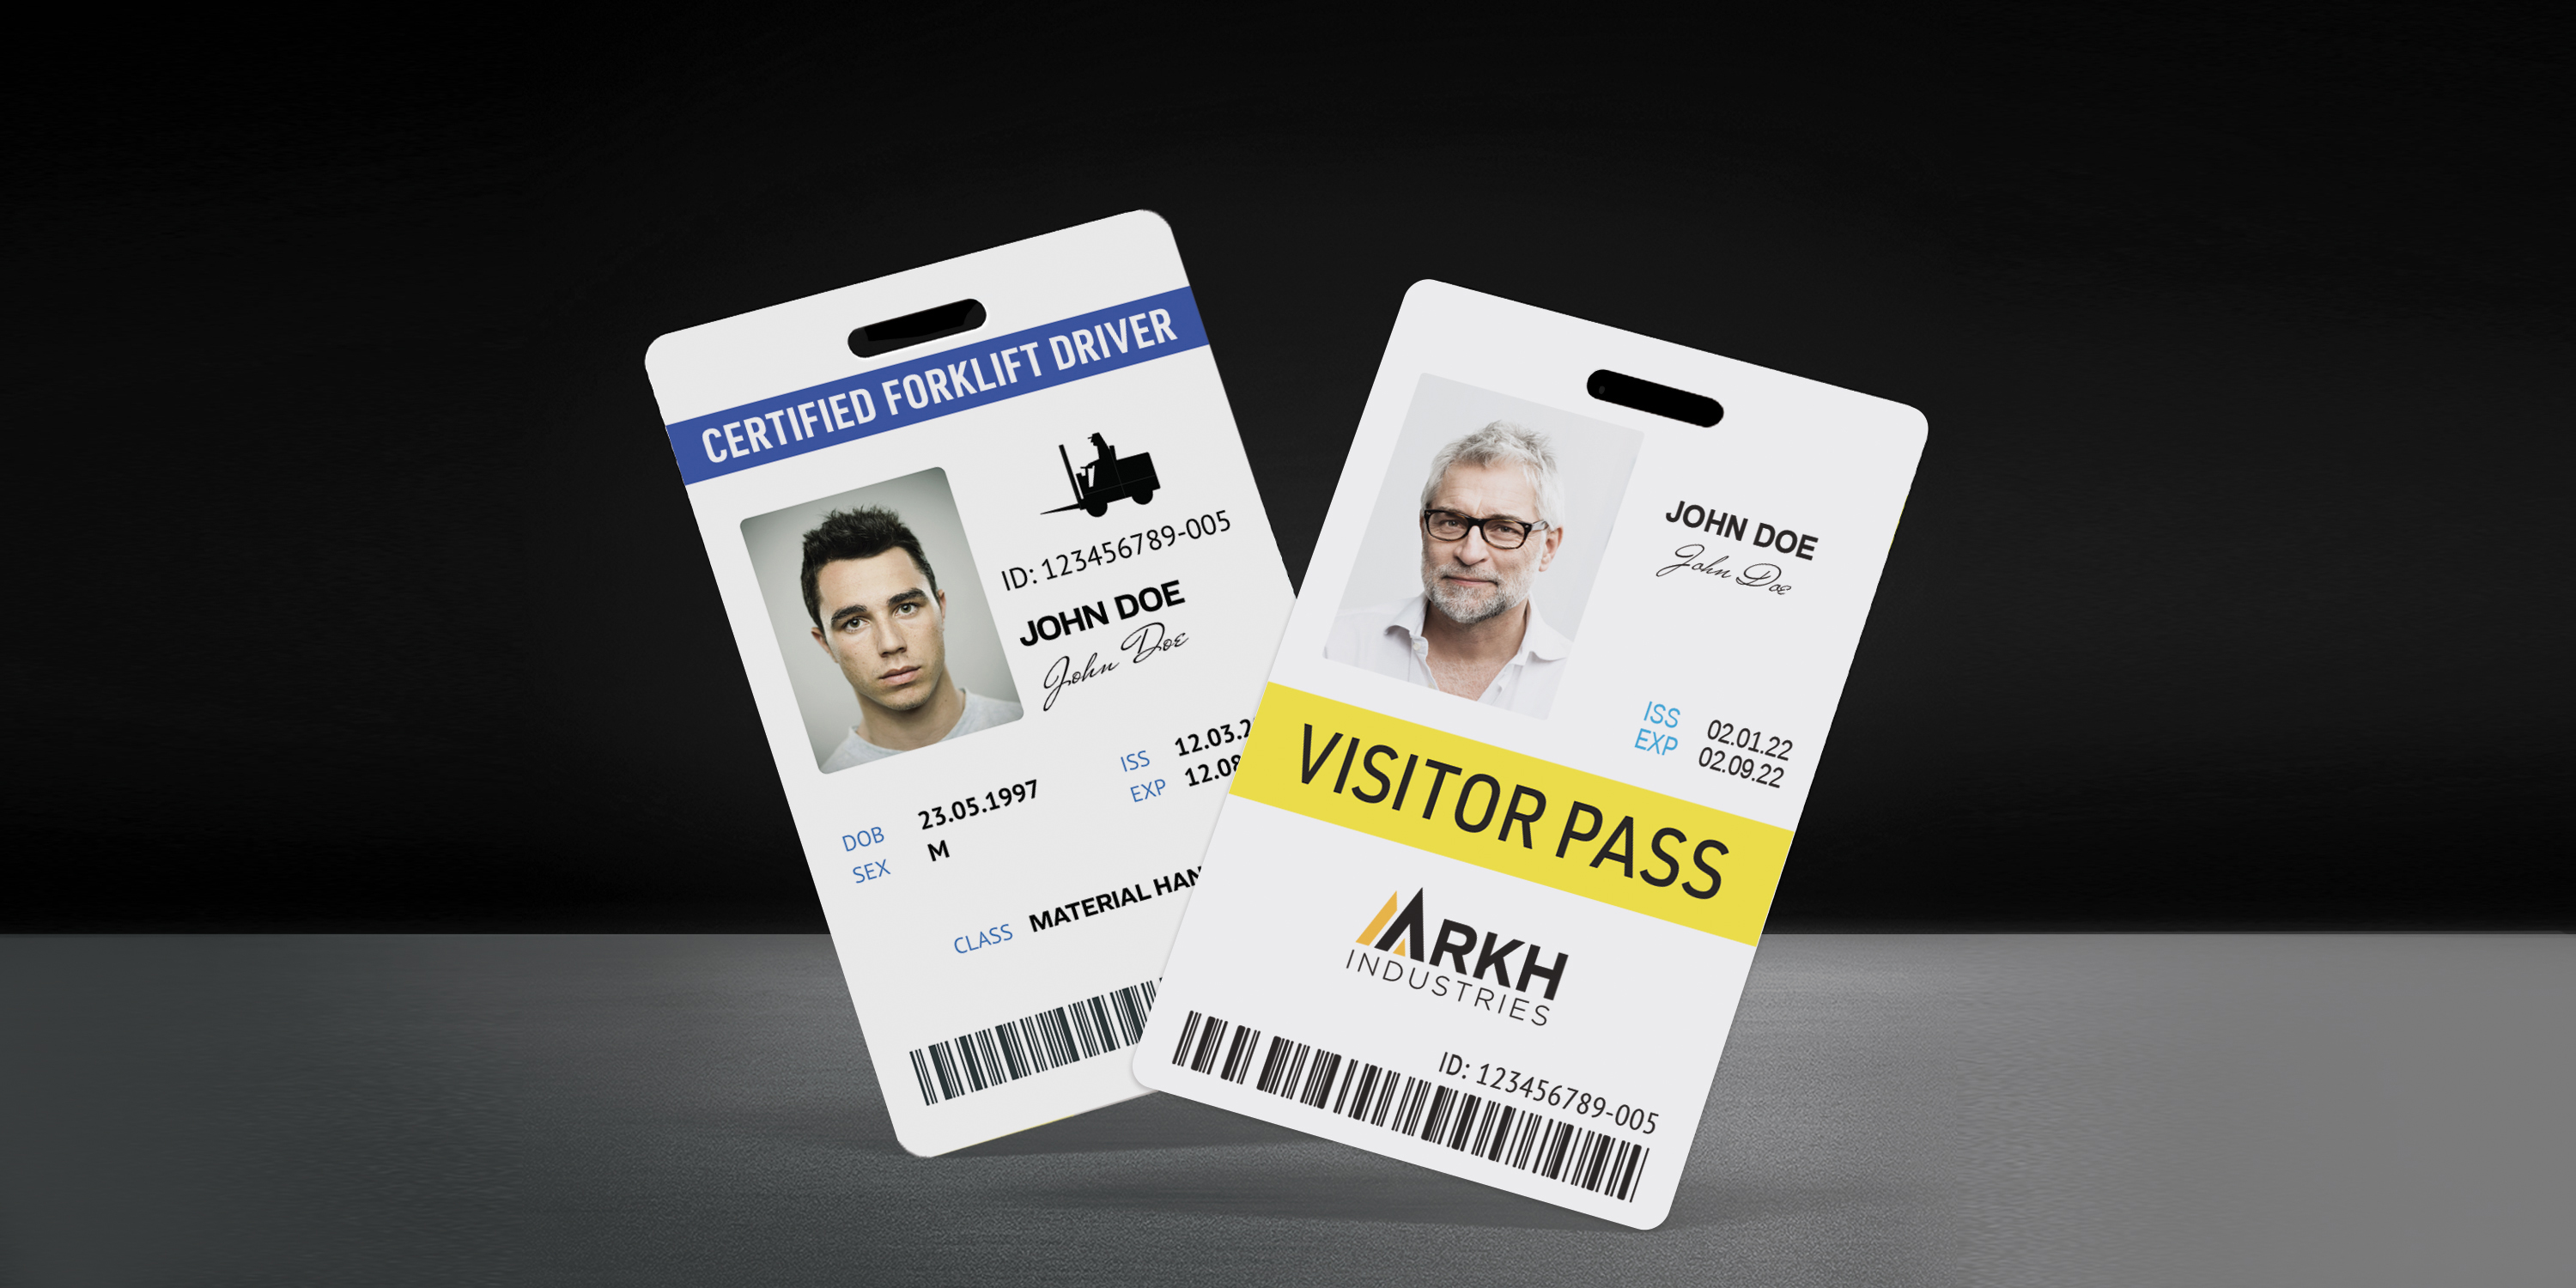 Image showing two examples of Avery 61612 tall employee ID badges. A photo ID of a certified forklift driver badge and a photo ID of a visitor pass badge